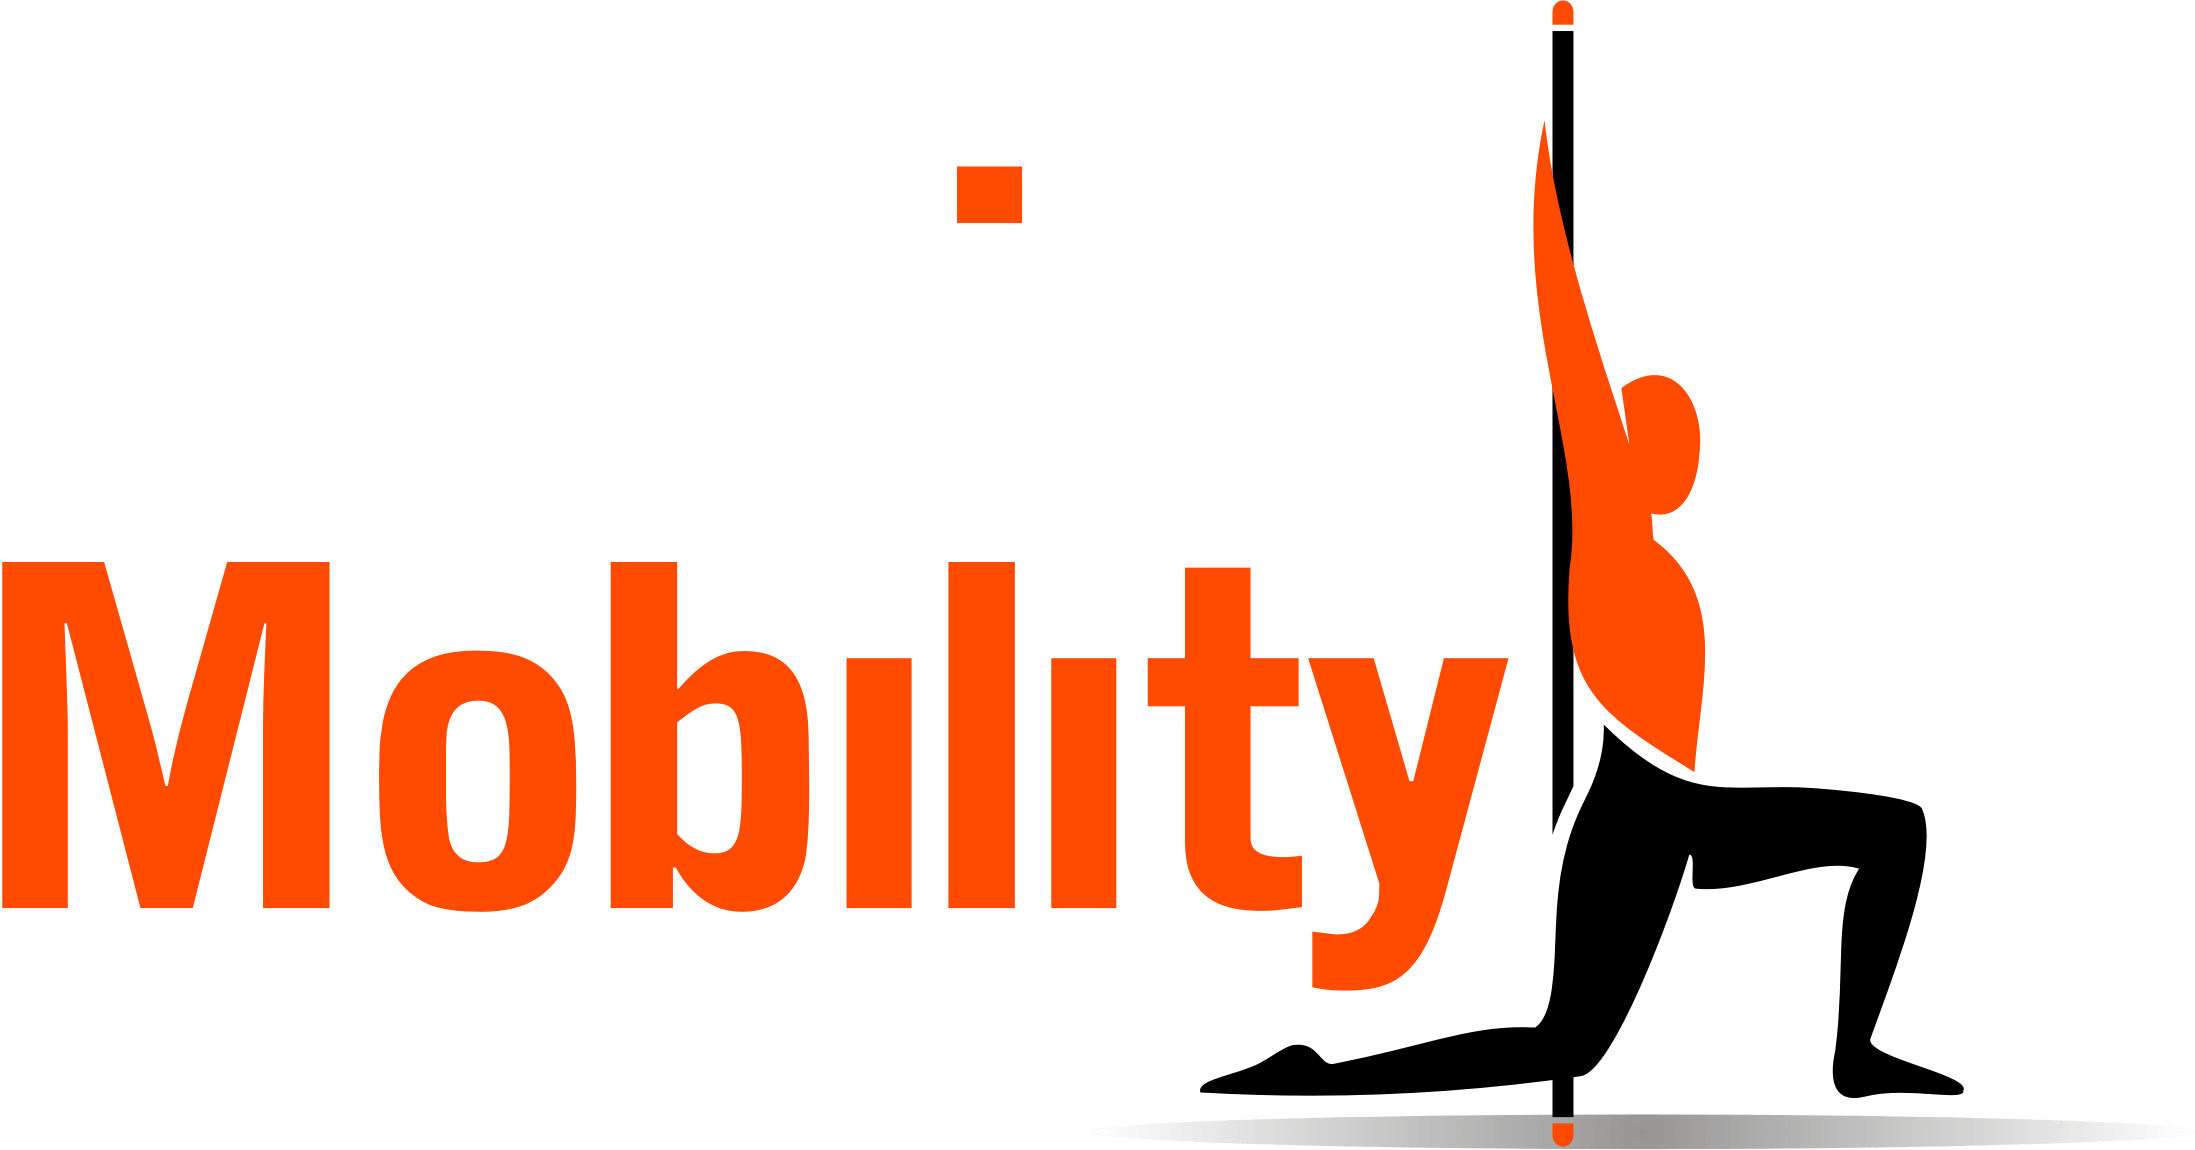 A M Mobility Logo - Mobility sticks and education. Movement Made Better - Stick Mobility UK